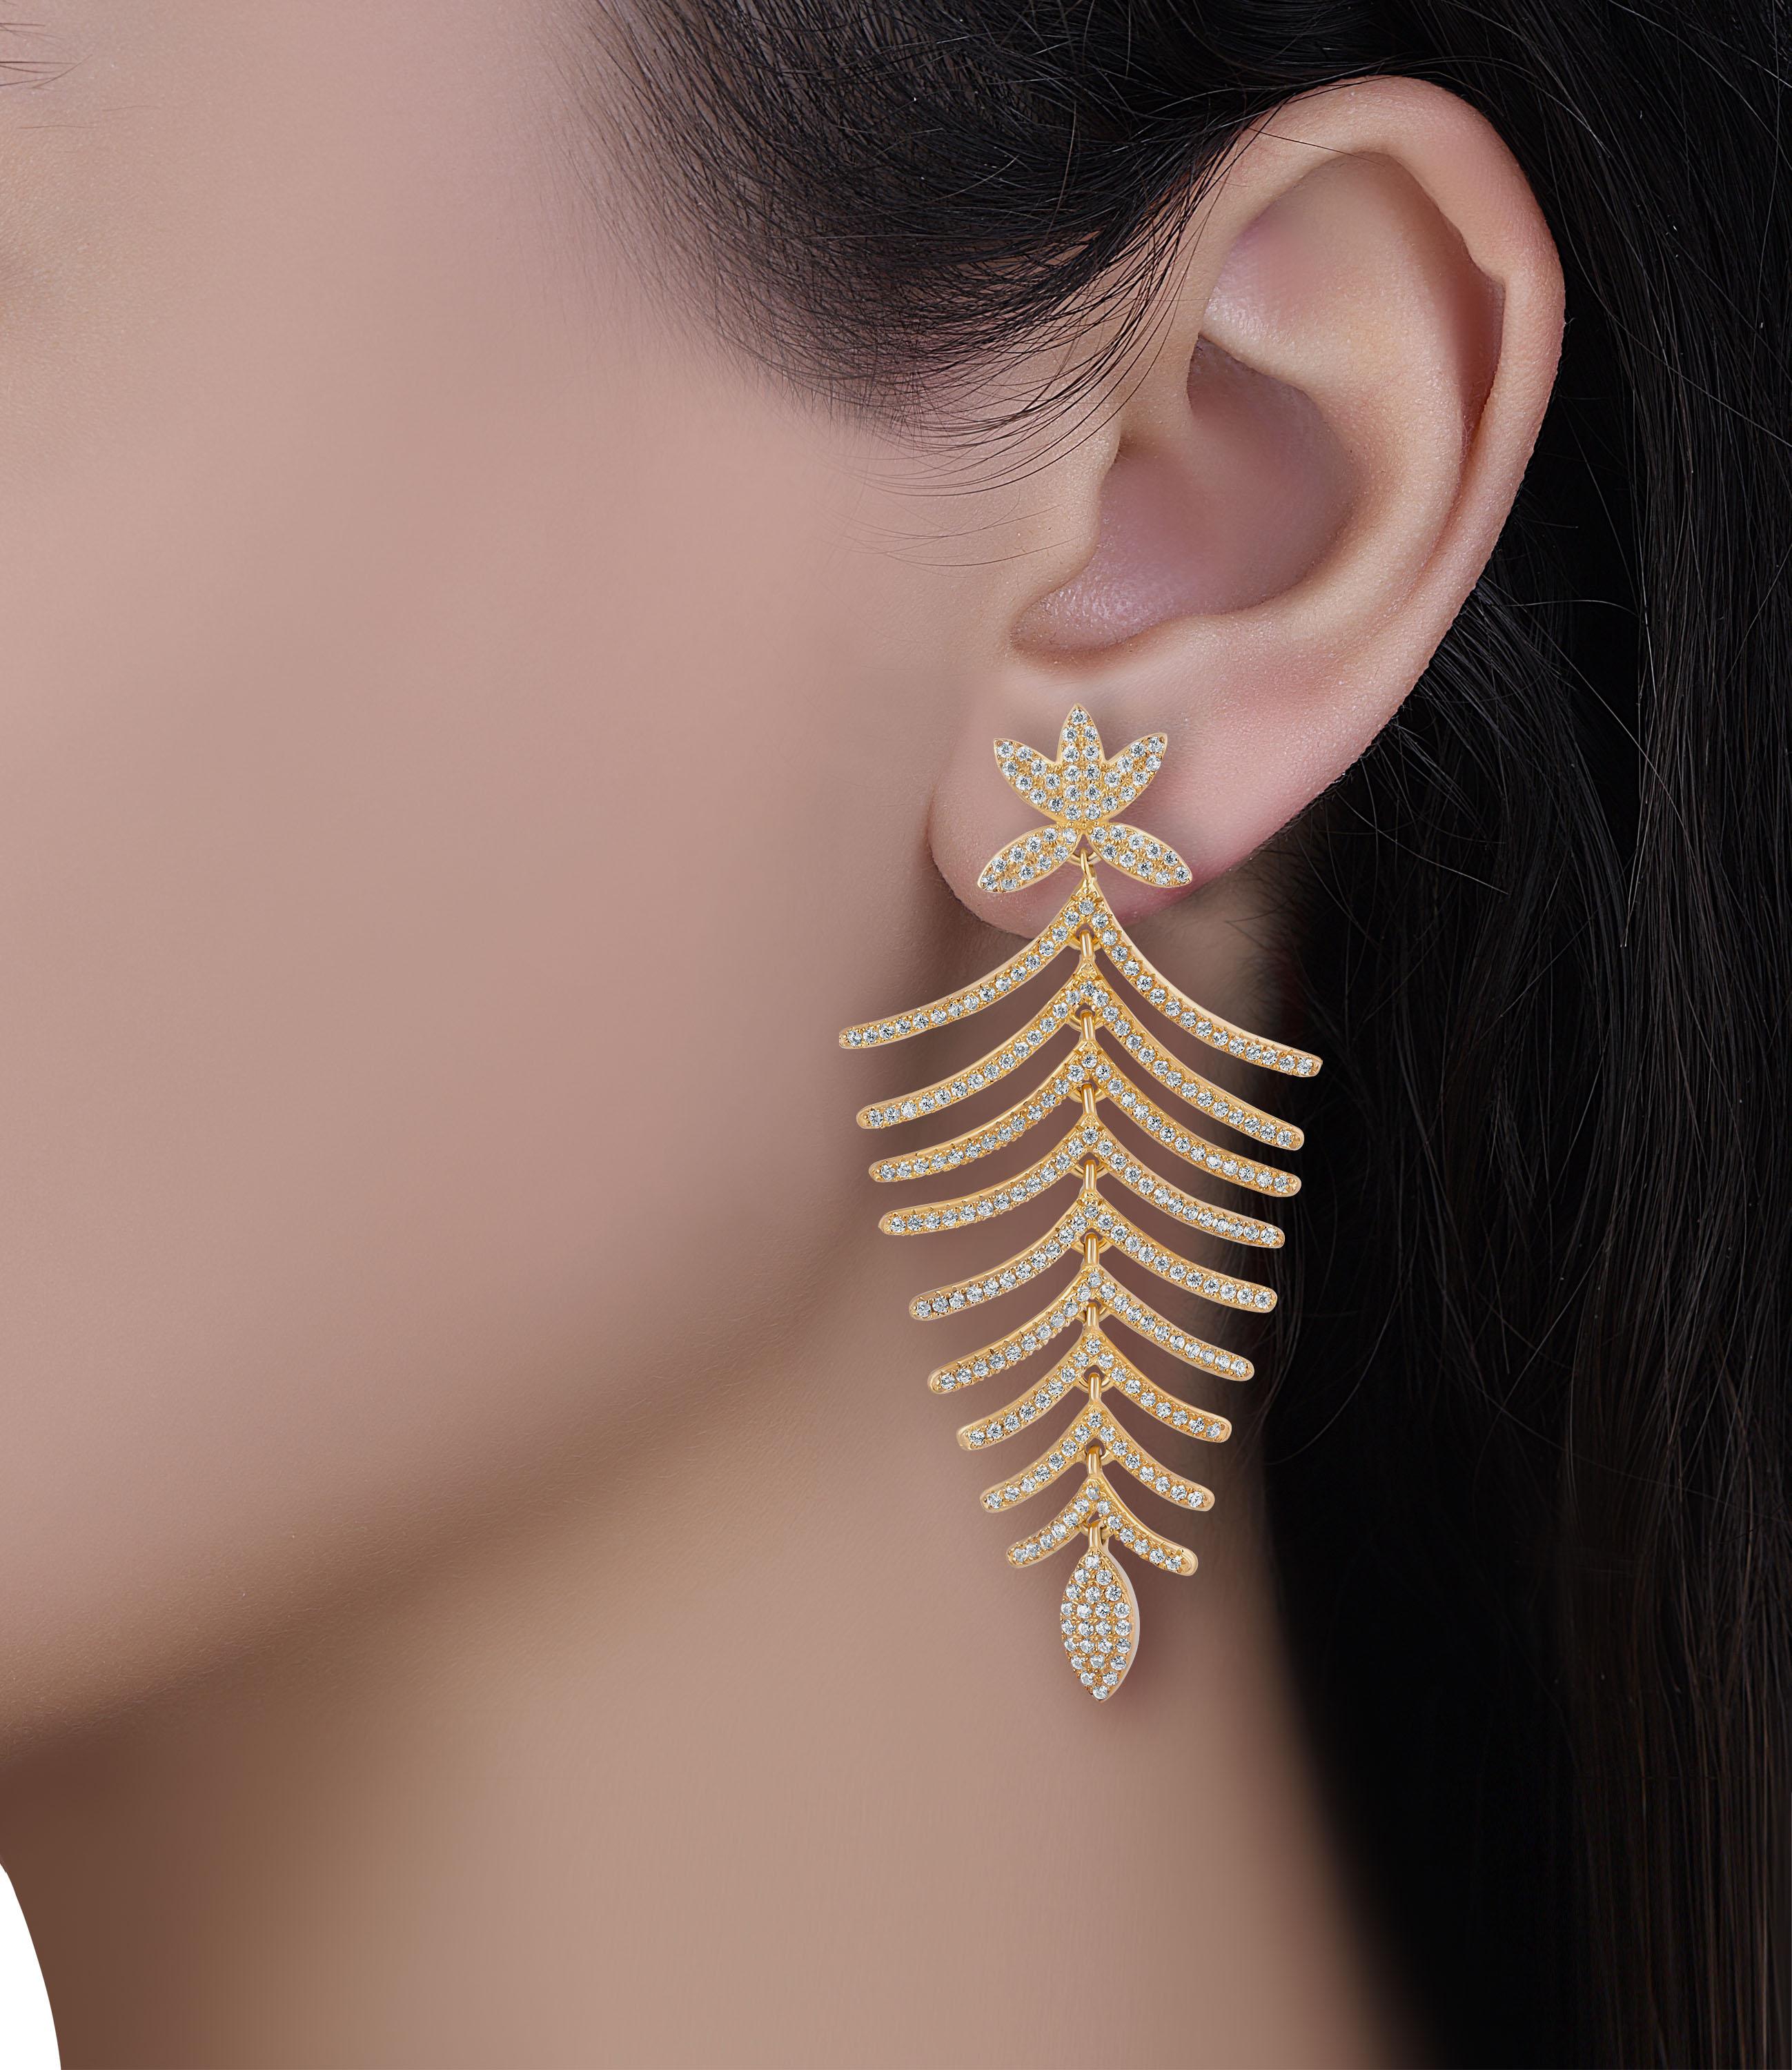 This amazing earring is Hand made in the Emilio Jewelry Atelier, Here are the details
Metal: 18k
Diamonds: approx 4.00ct total weight carats 
Color/Clarity: E color Vs clarity 
Cut: excellent 
You can order these earrings in either 18k white yellow